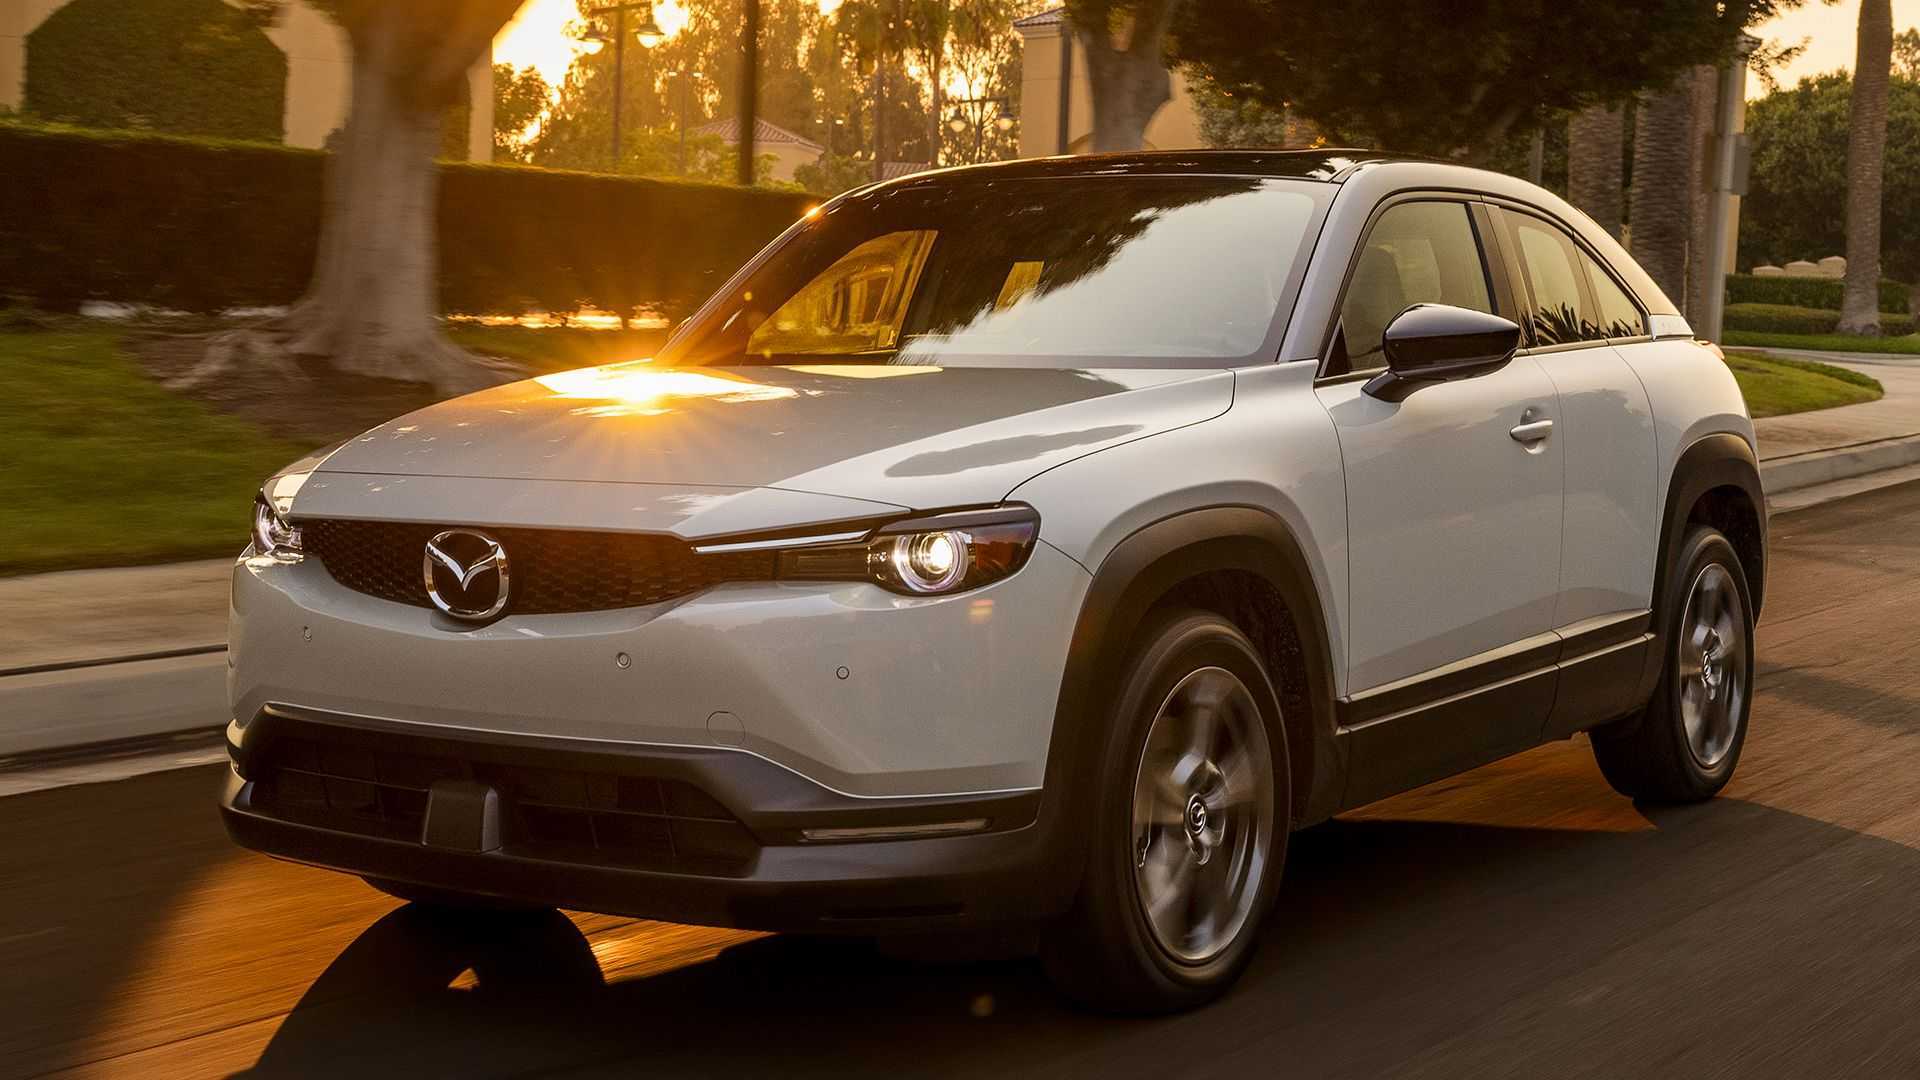 mazda considers building electric vehicles in new mexico plant